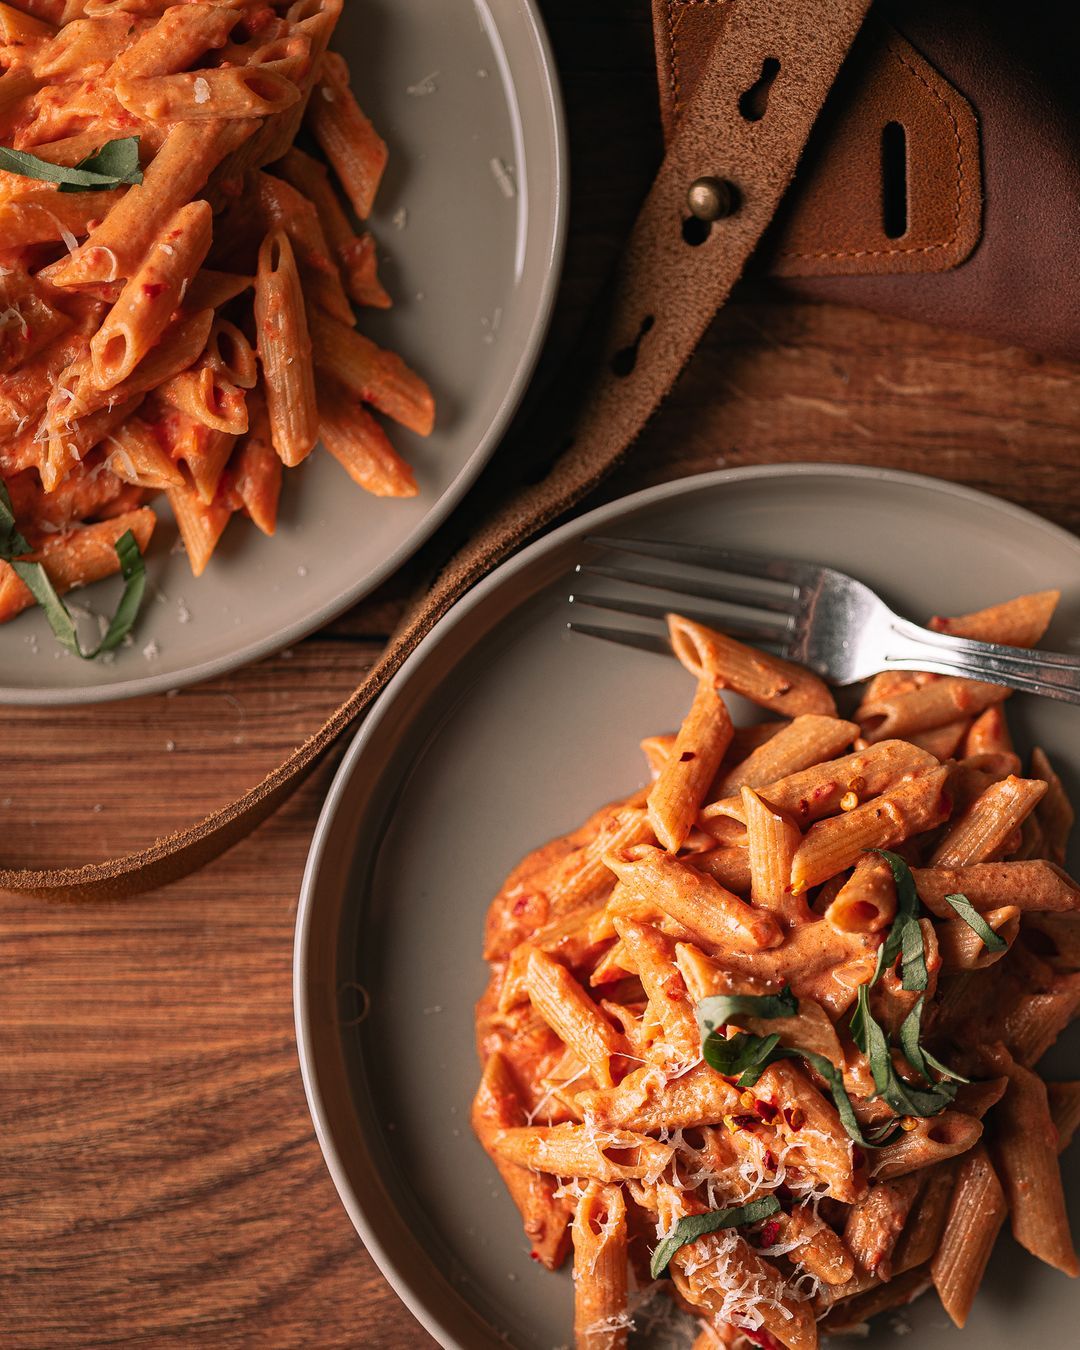 Penne alla vodka - Spicy, easy & a touch of alcohol 🌶️🤪